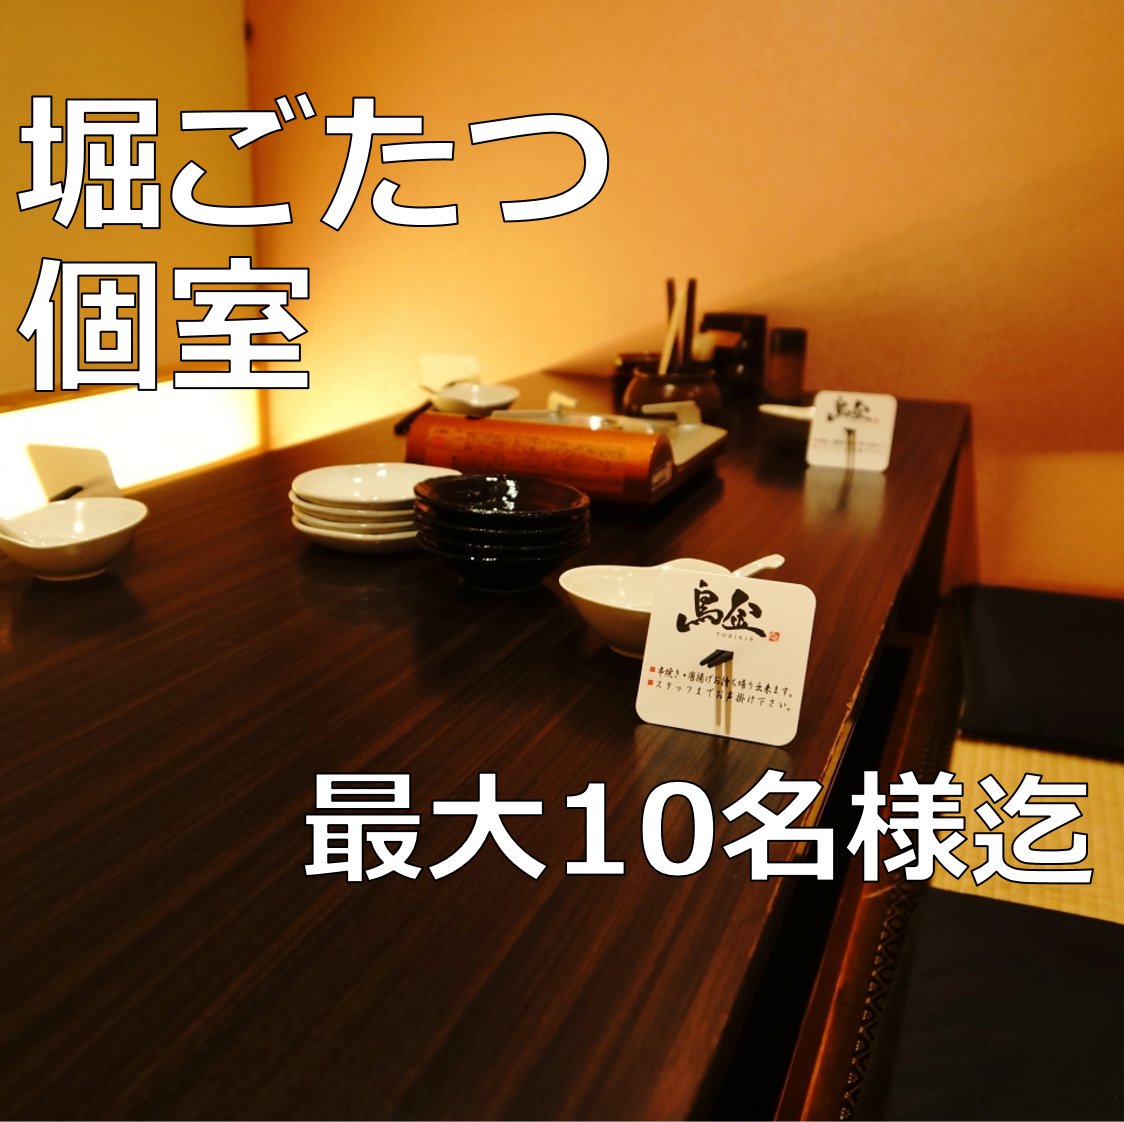 Our private rooms with sunken kotatsu tables can accommodate small groups up to a maximum of 40 people!